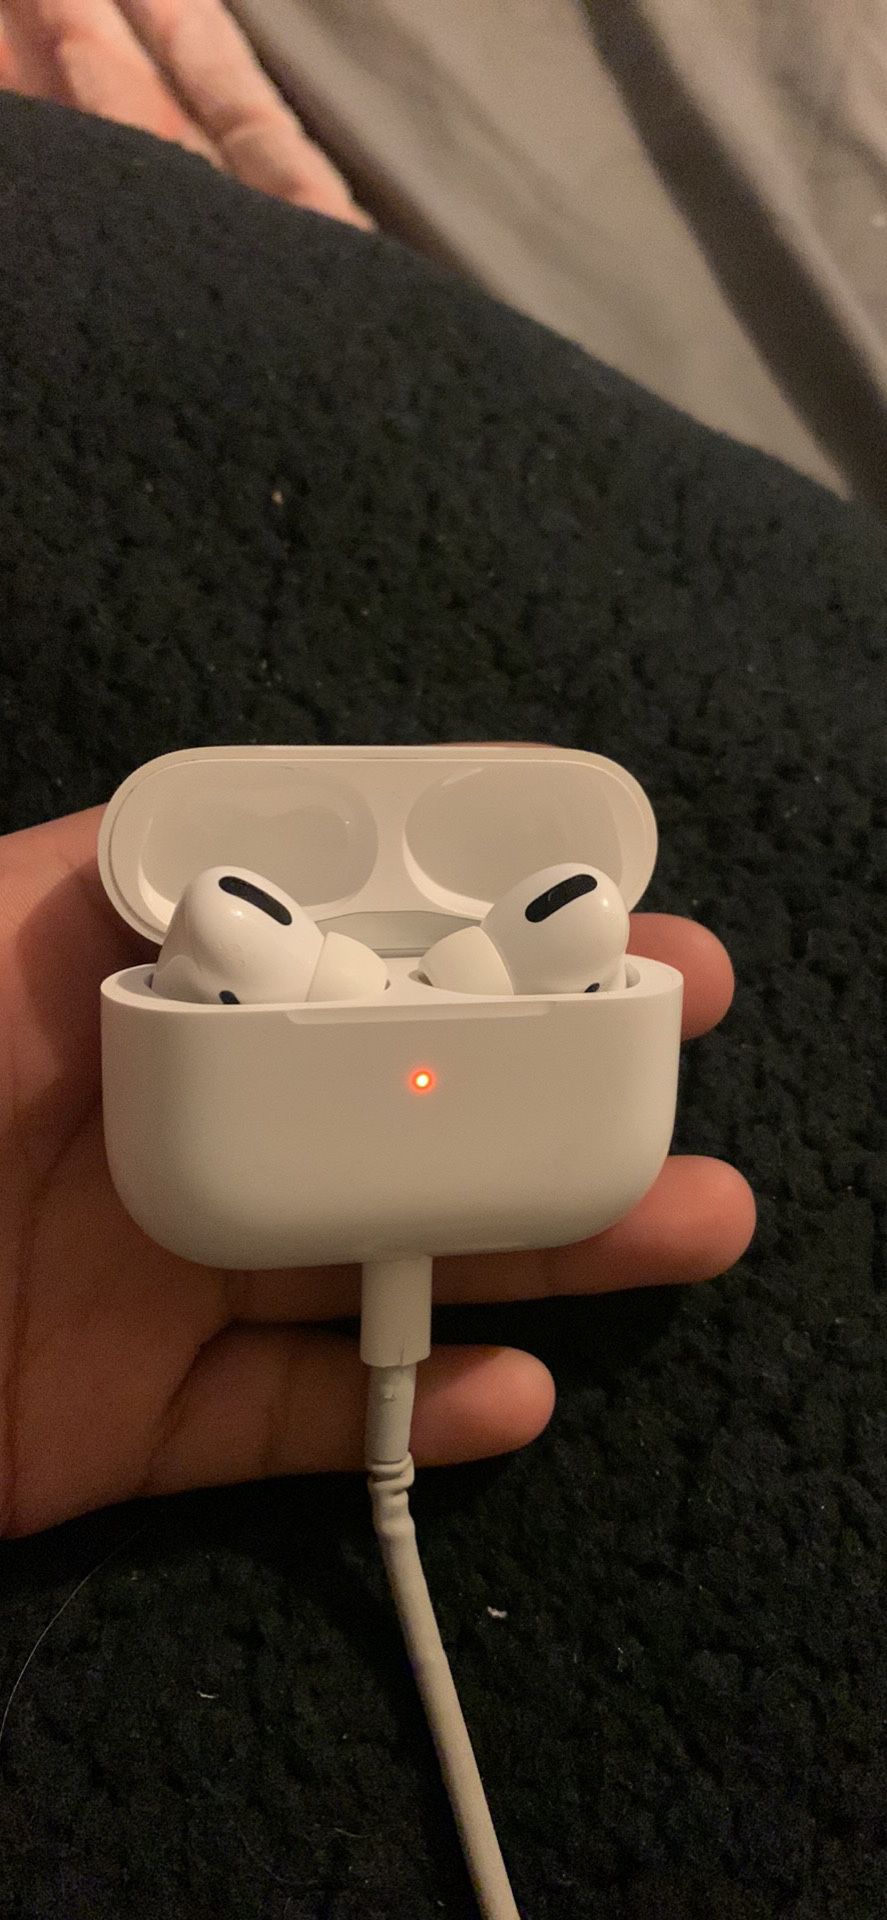 Airpods Pro W/ Case